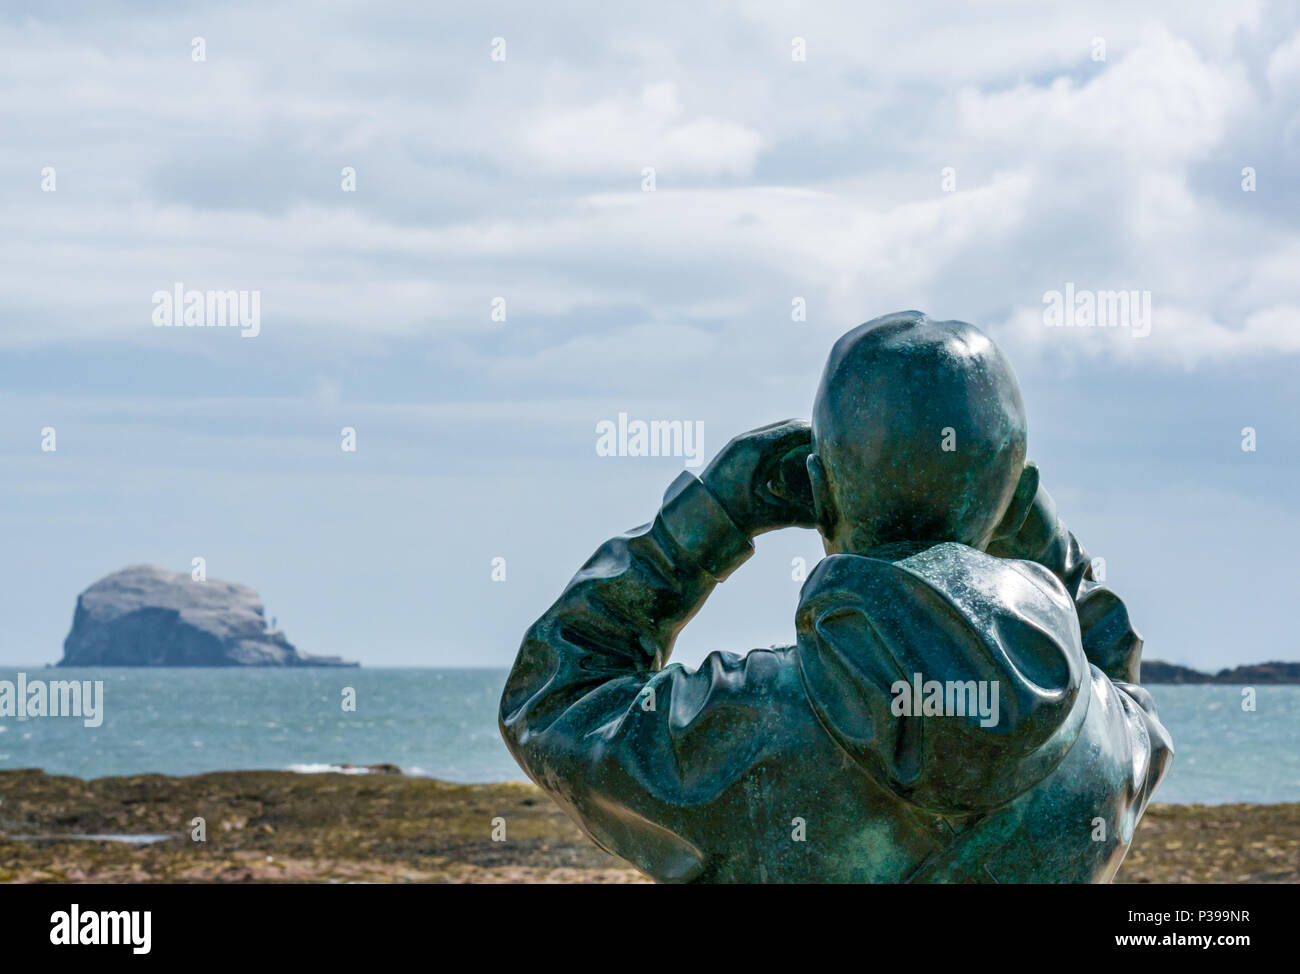 Milsey Bay, North Berwick, East Lothian, Scotland, United Kingdom, 18th June 2018. A bronze life size statue called The Watcher by sculptor Kenny Hunter looks out to the Bass Rock gannet colony, the largest Northern gannet colony Stock Photo